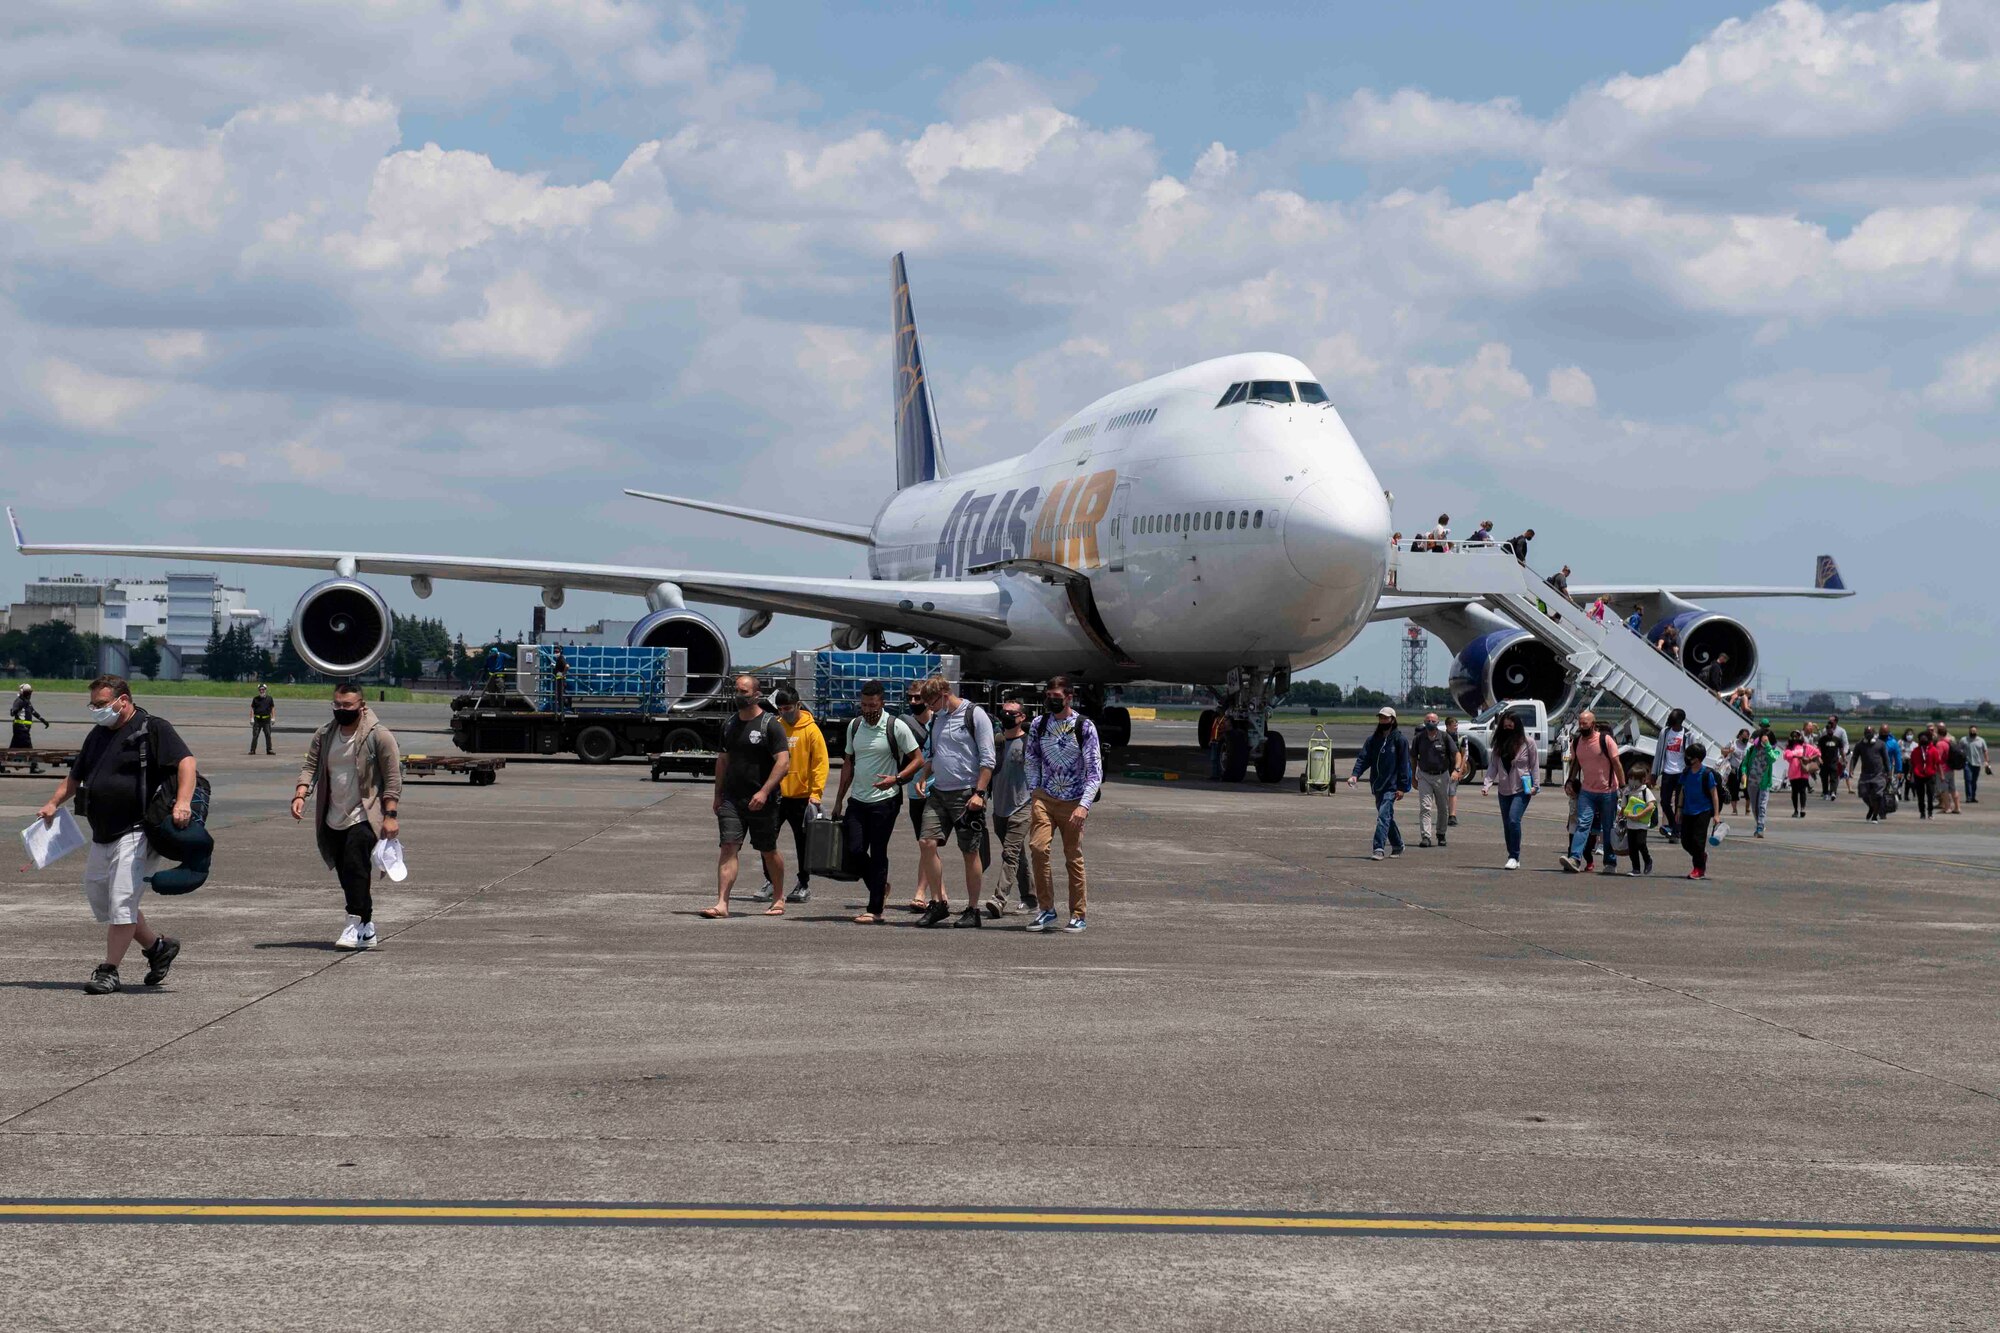 The 730th Air Mobility Squadron, located at Yokota Air Base, welcomed eight evacuated aircraft from Kadena Air Base in July ahead of Typhoon In-fa. The aerial port also maintained normal operations, including Patriot Express missions.